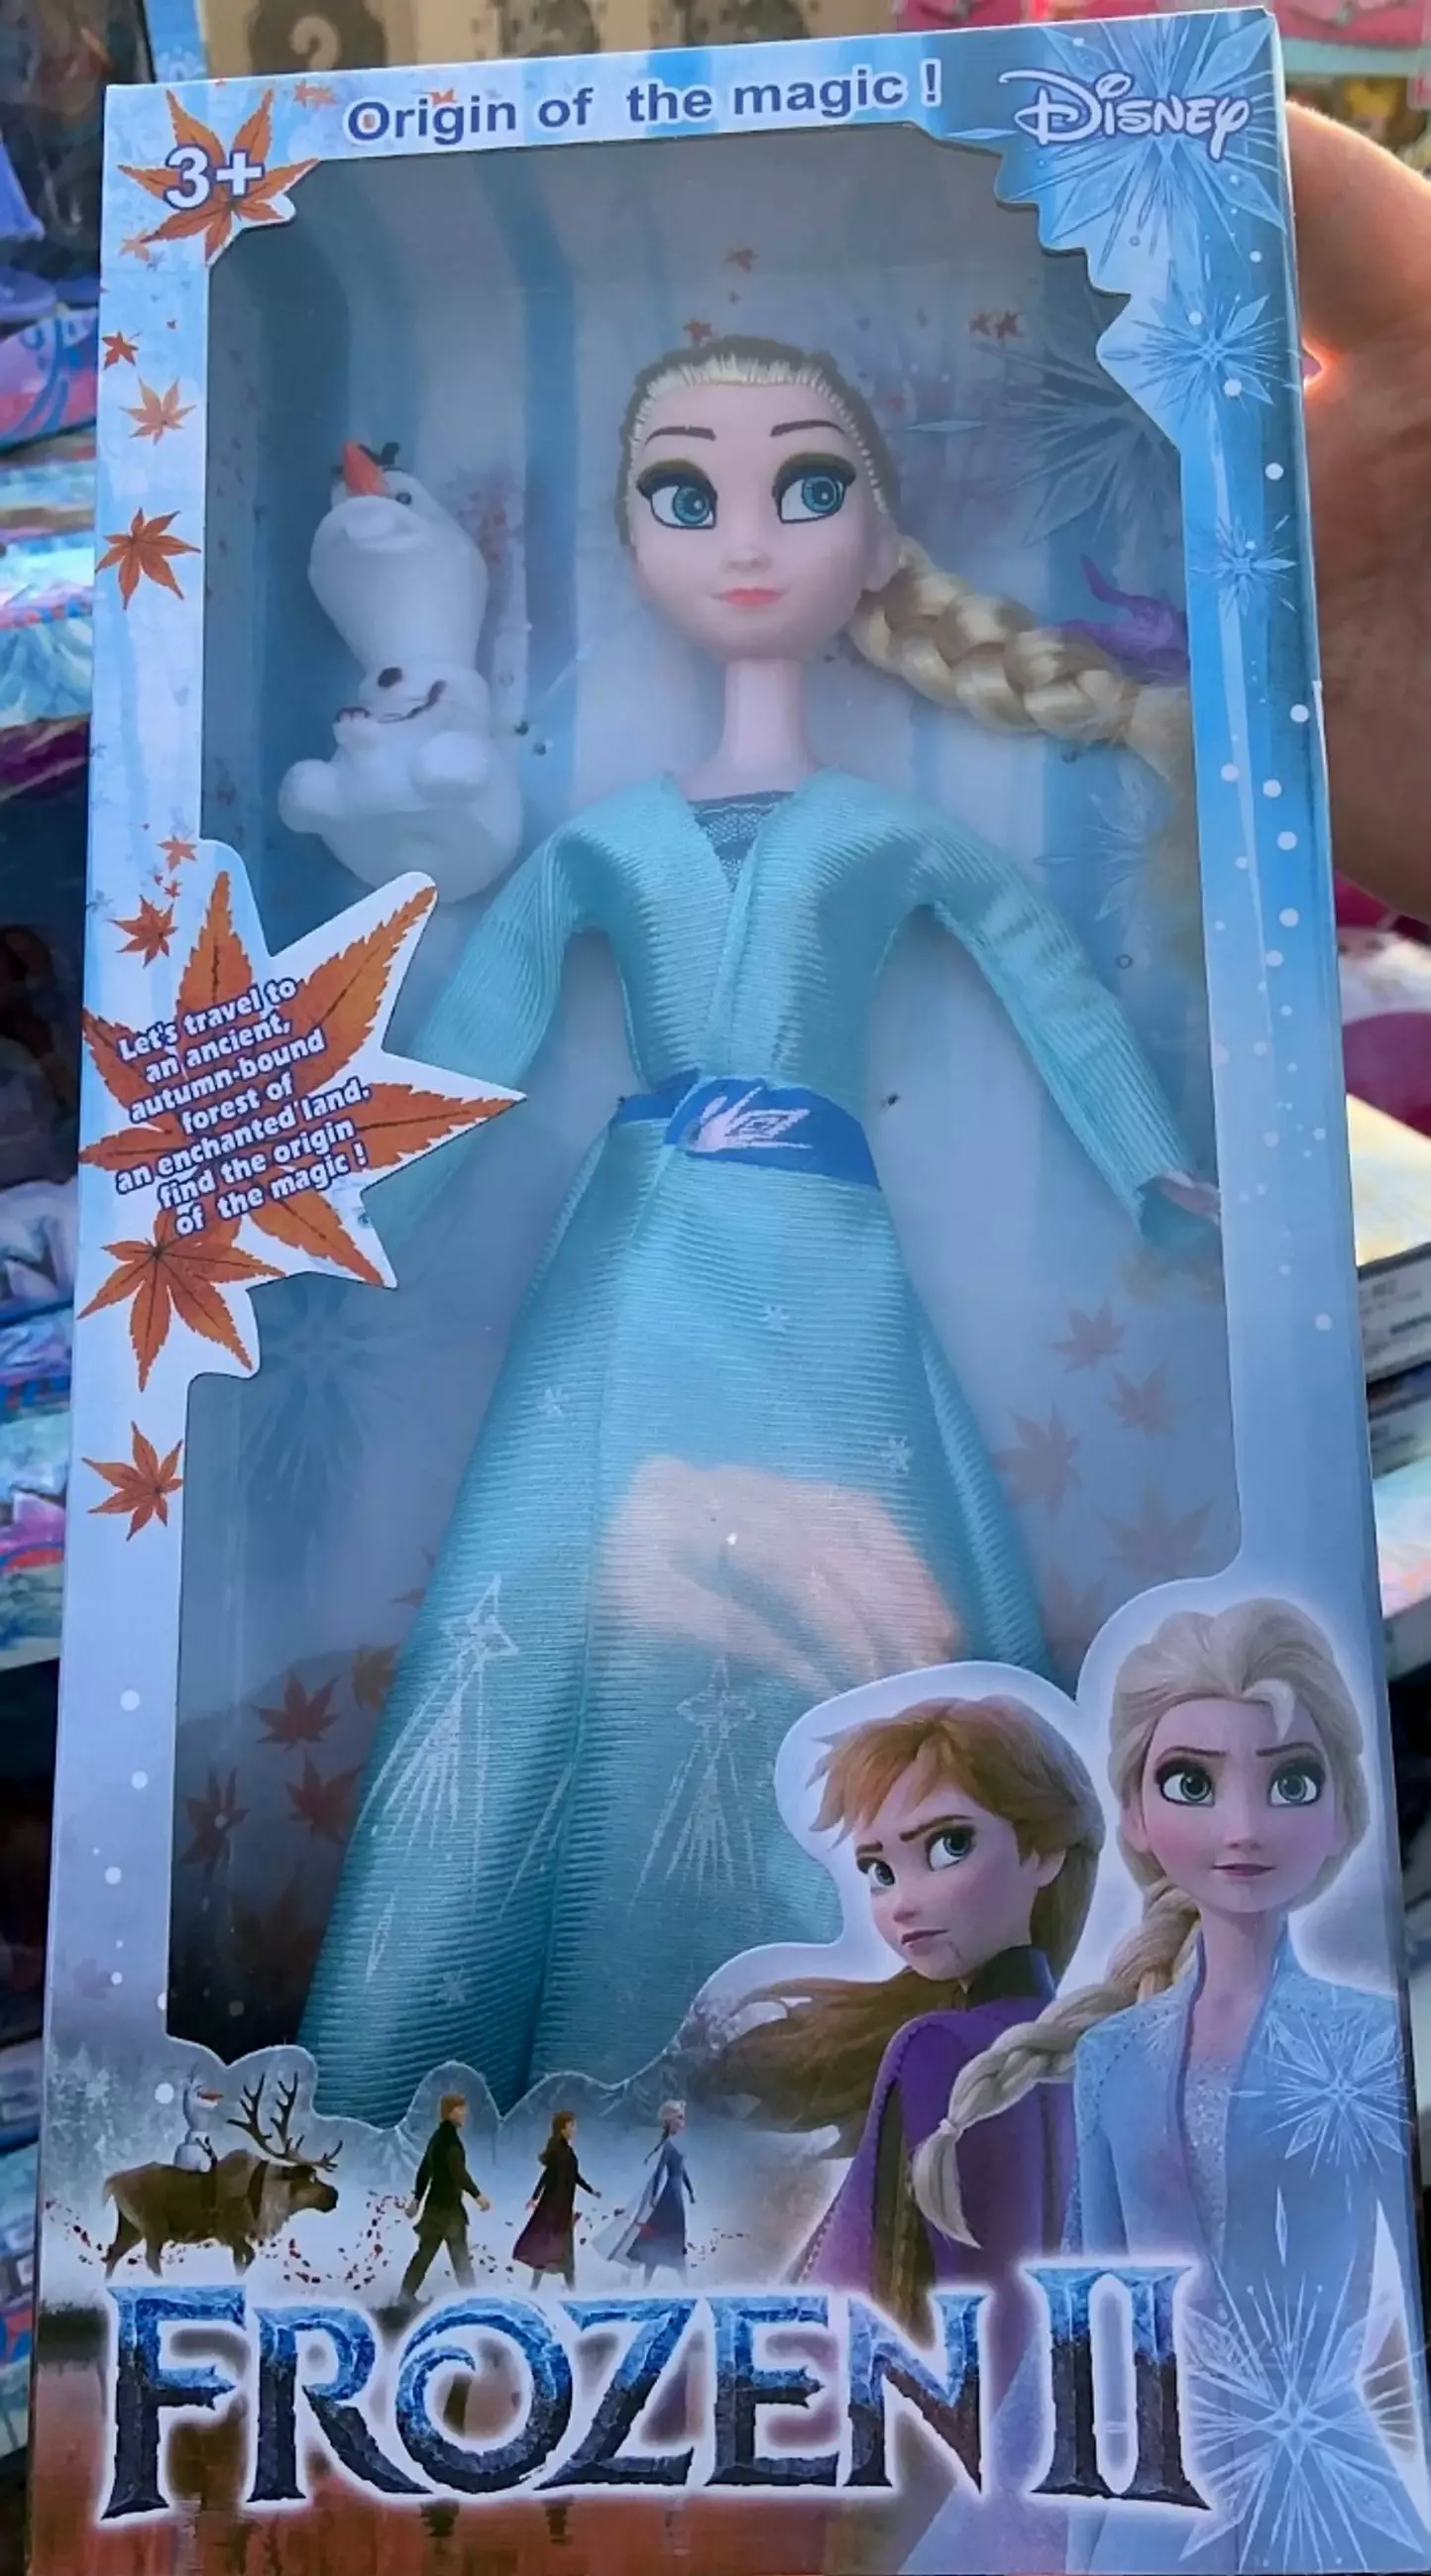 The Frozen dolls are fake and not made by Disney (